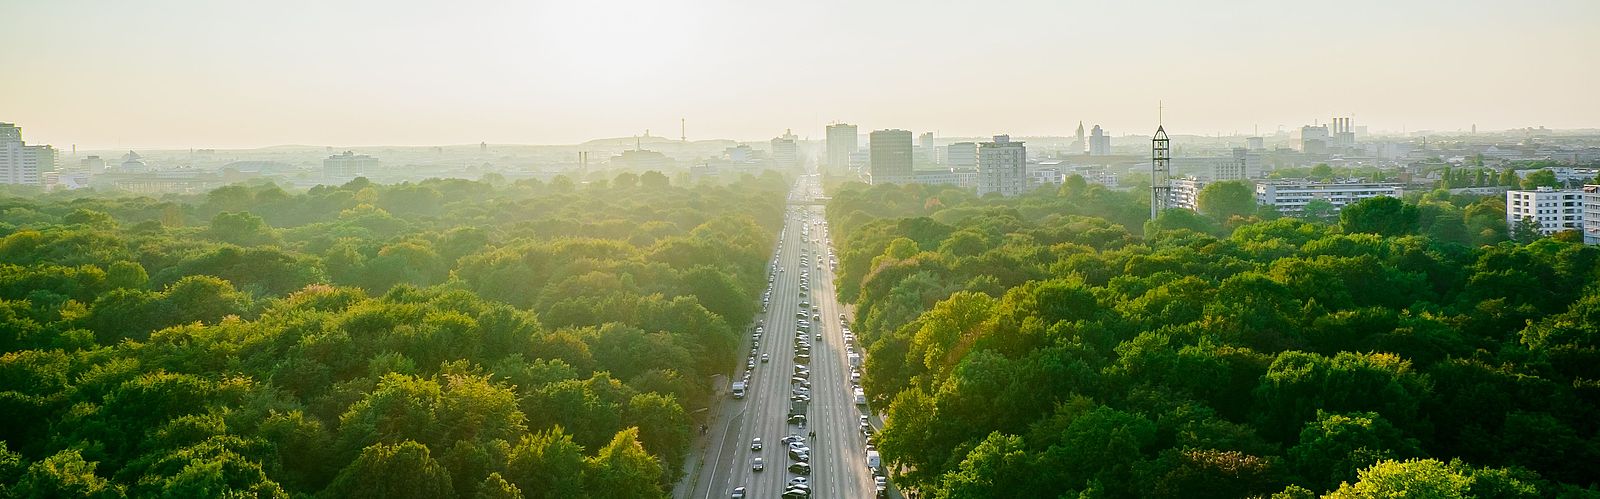 Aerial view of highway admidst trees